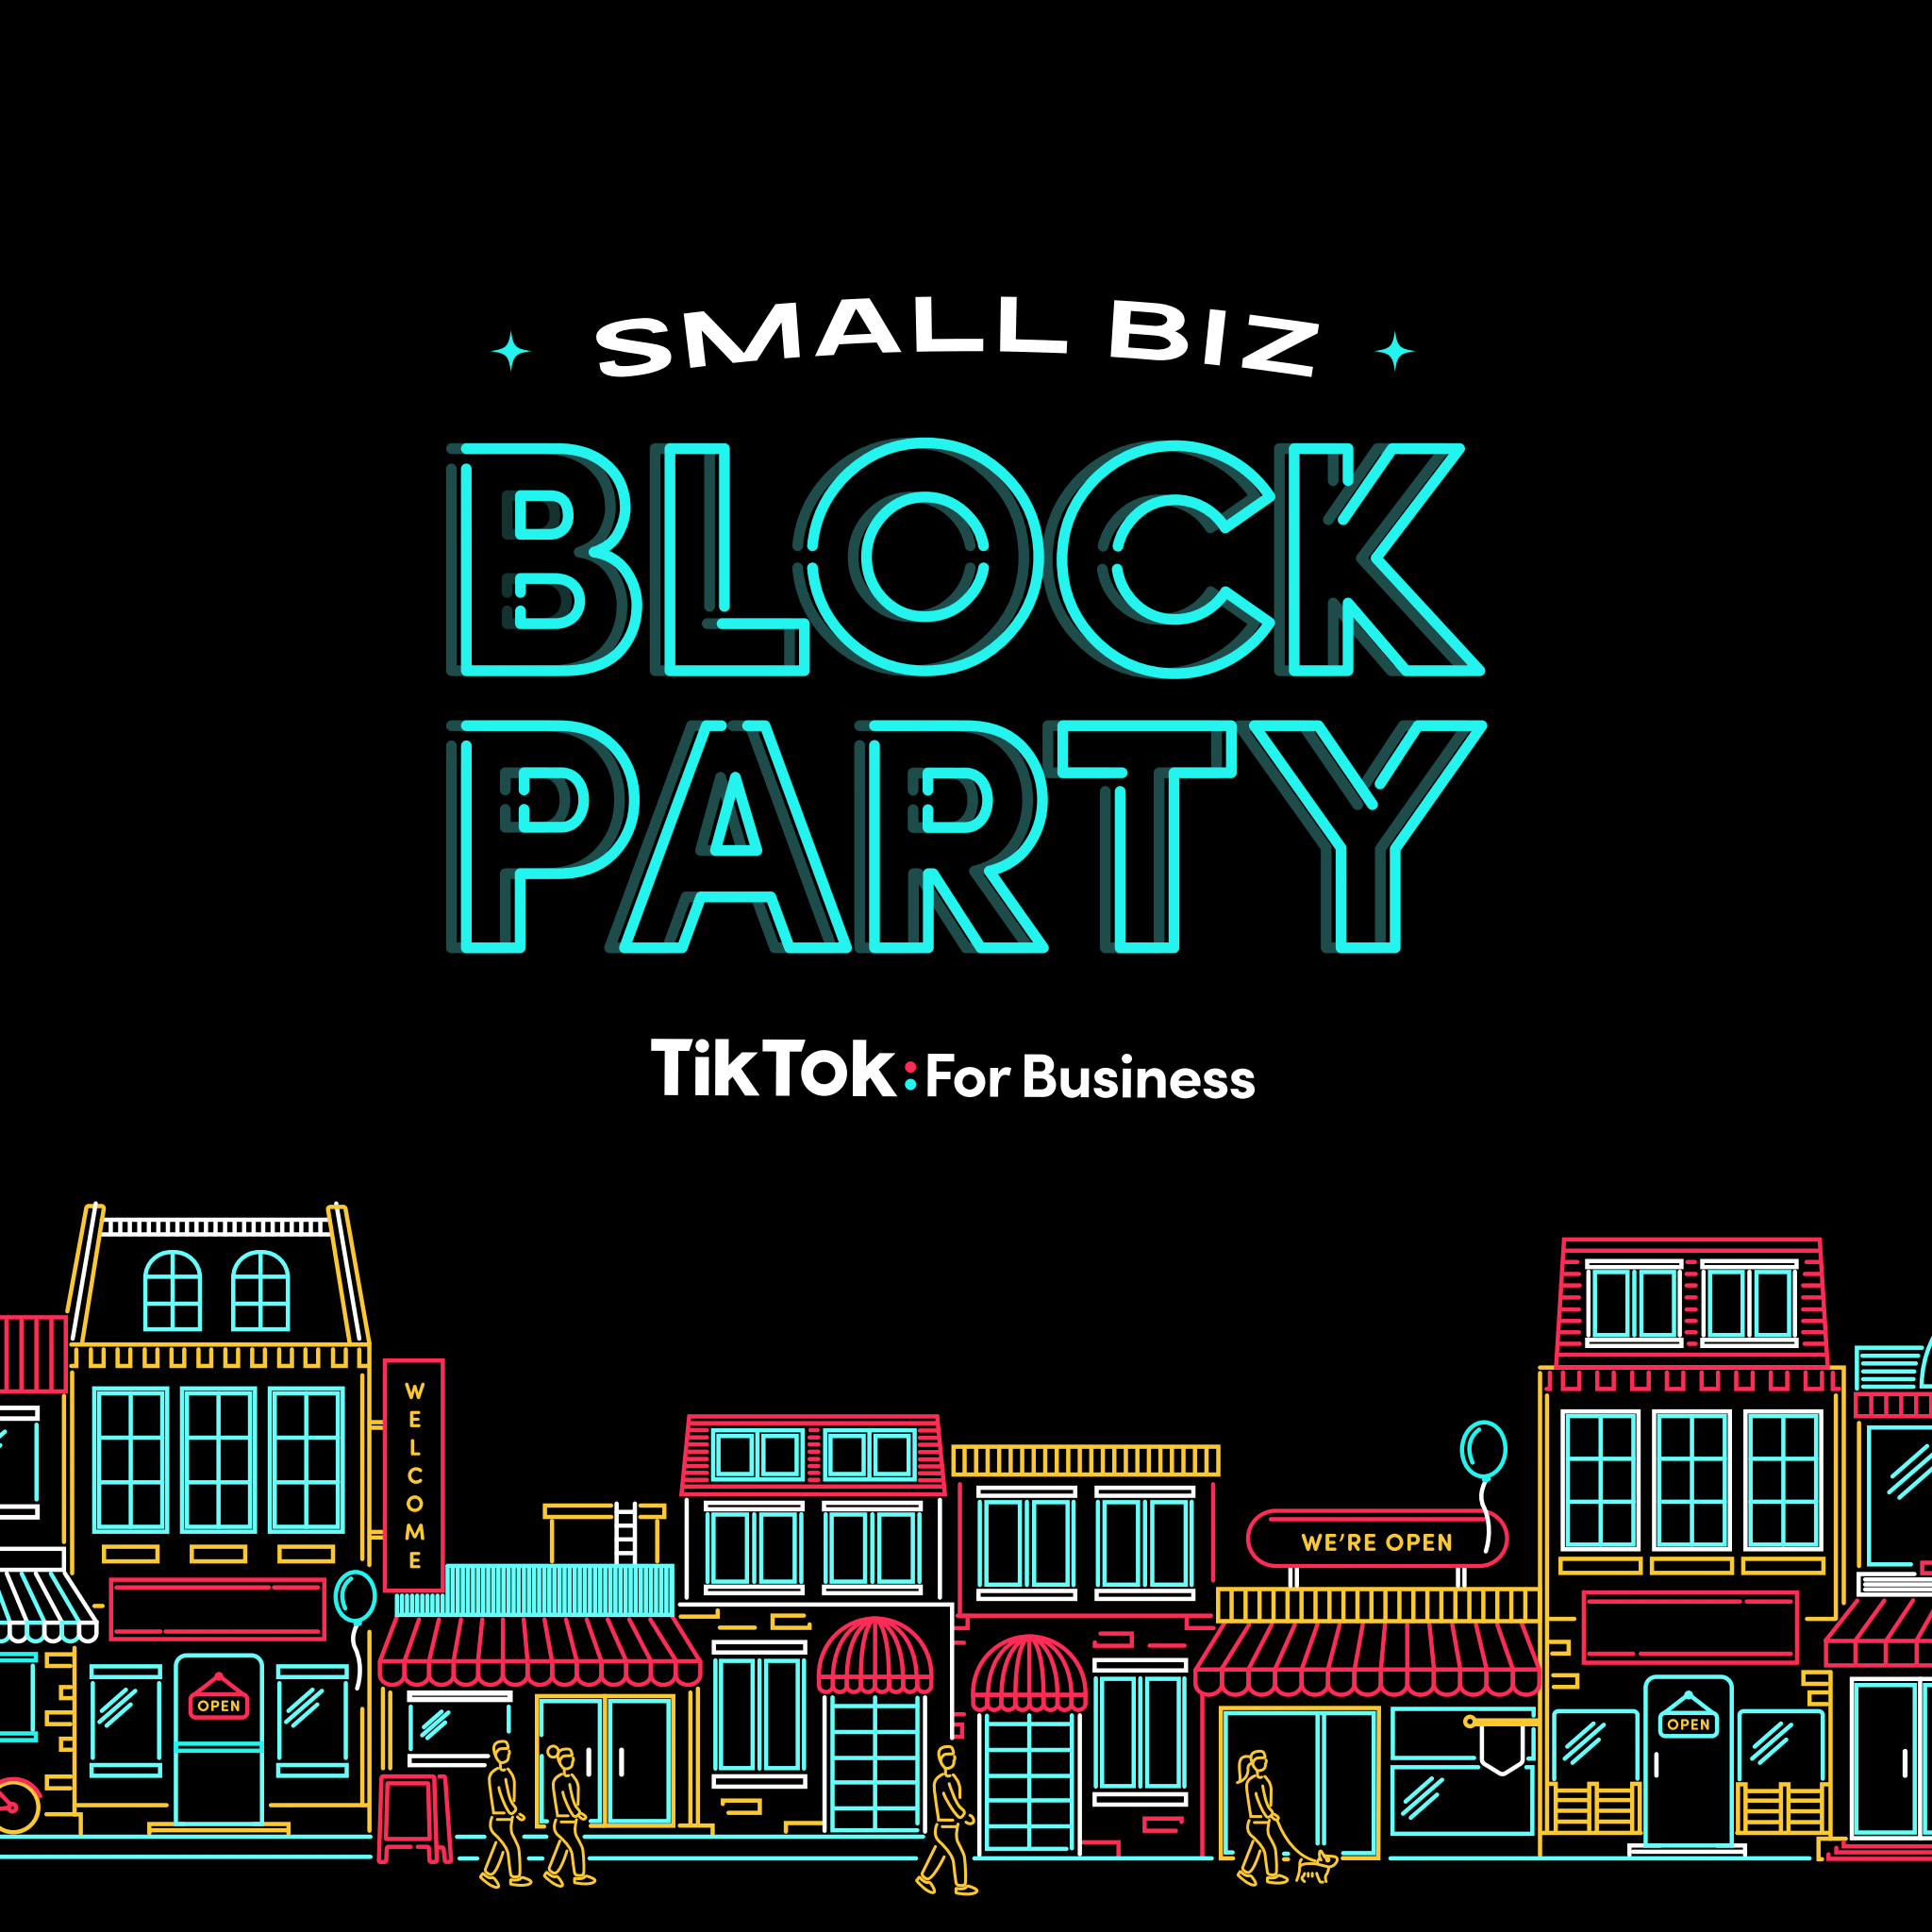 Small Biz Block Party: TikTok's first nationwide workshop series to help  SMBs